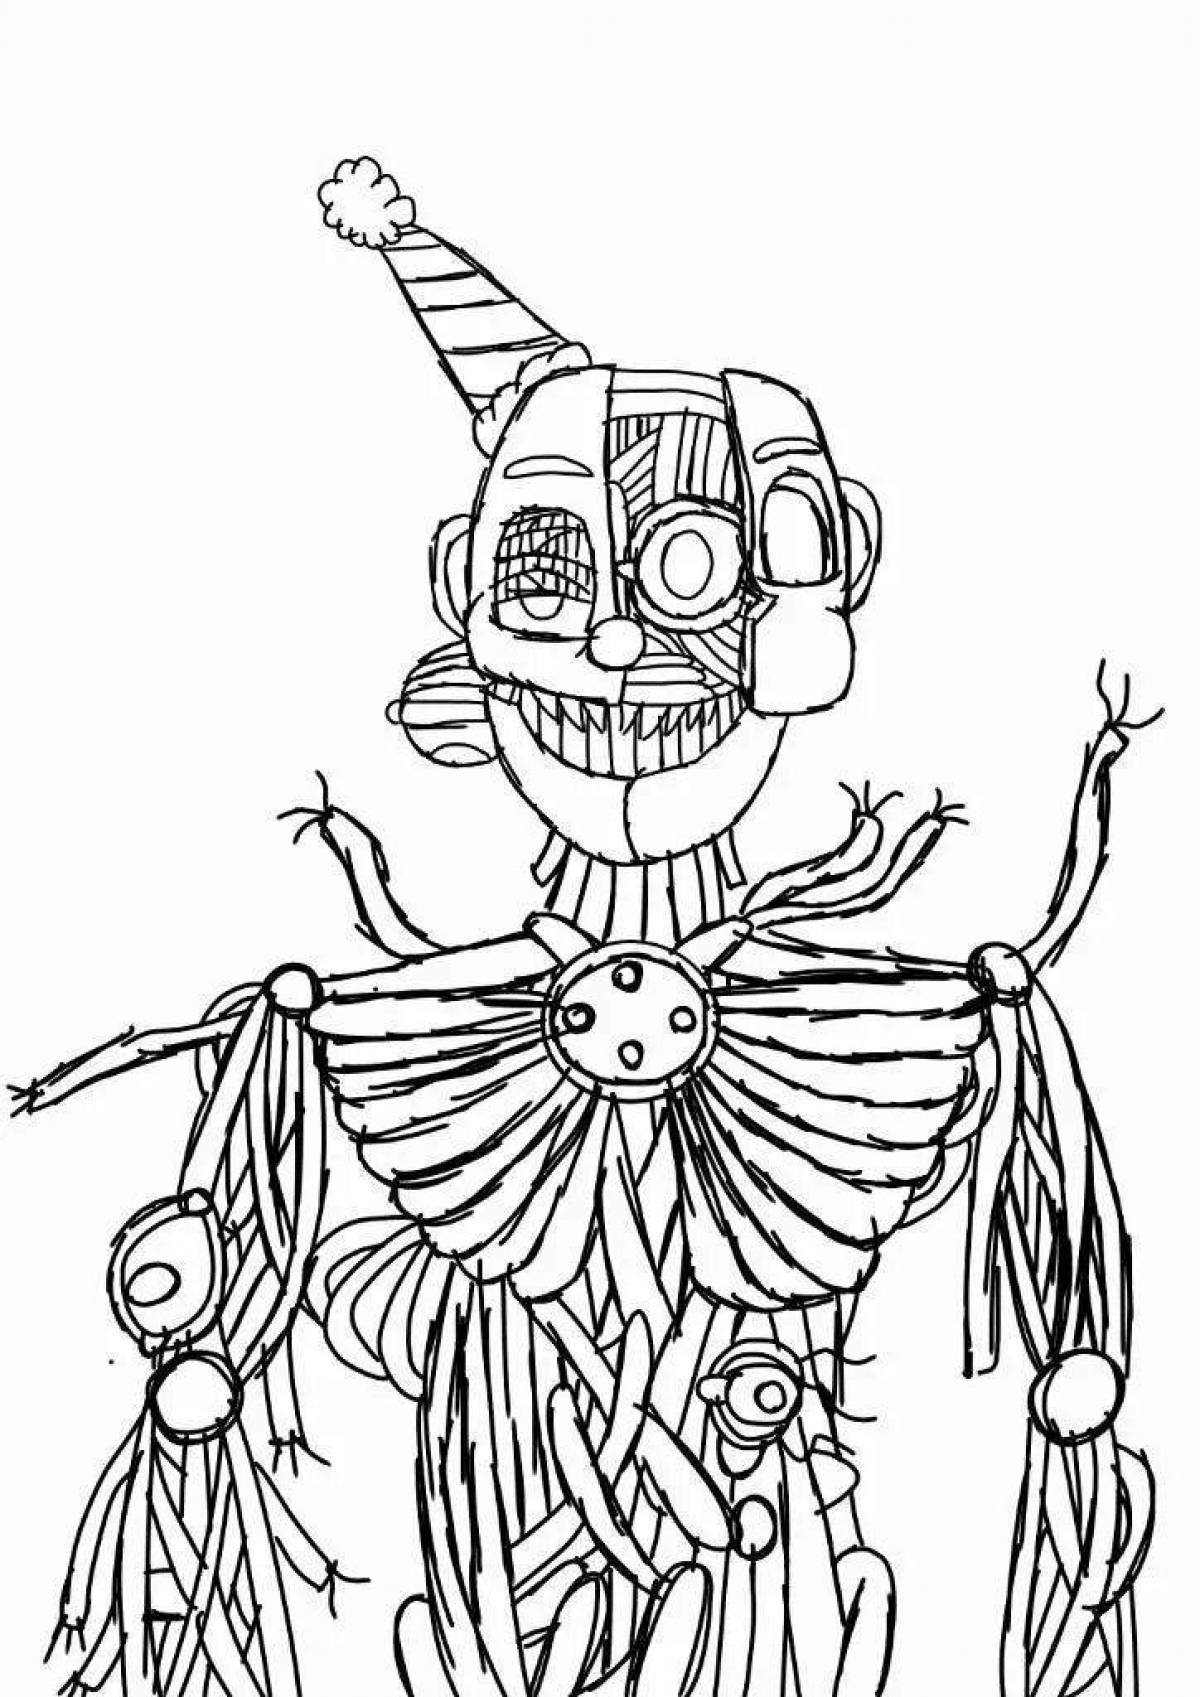 Regal puppet fnaf coloring page